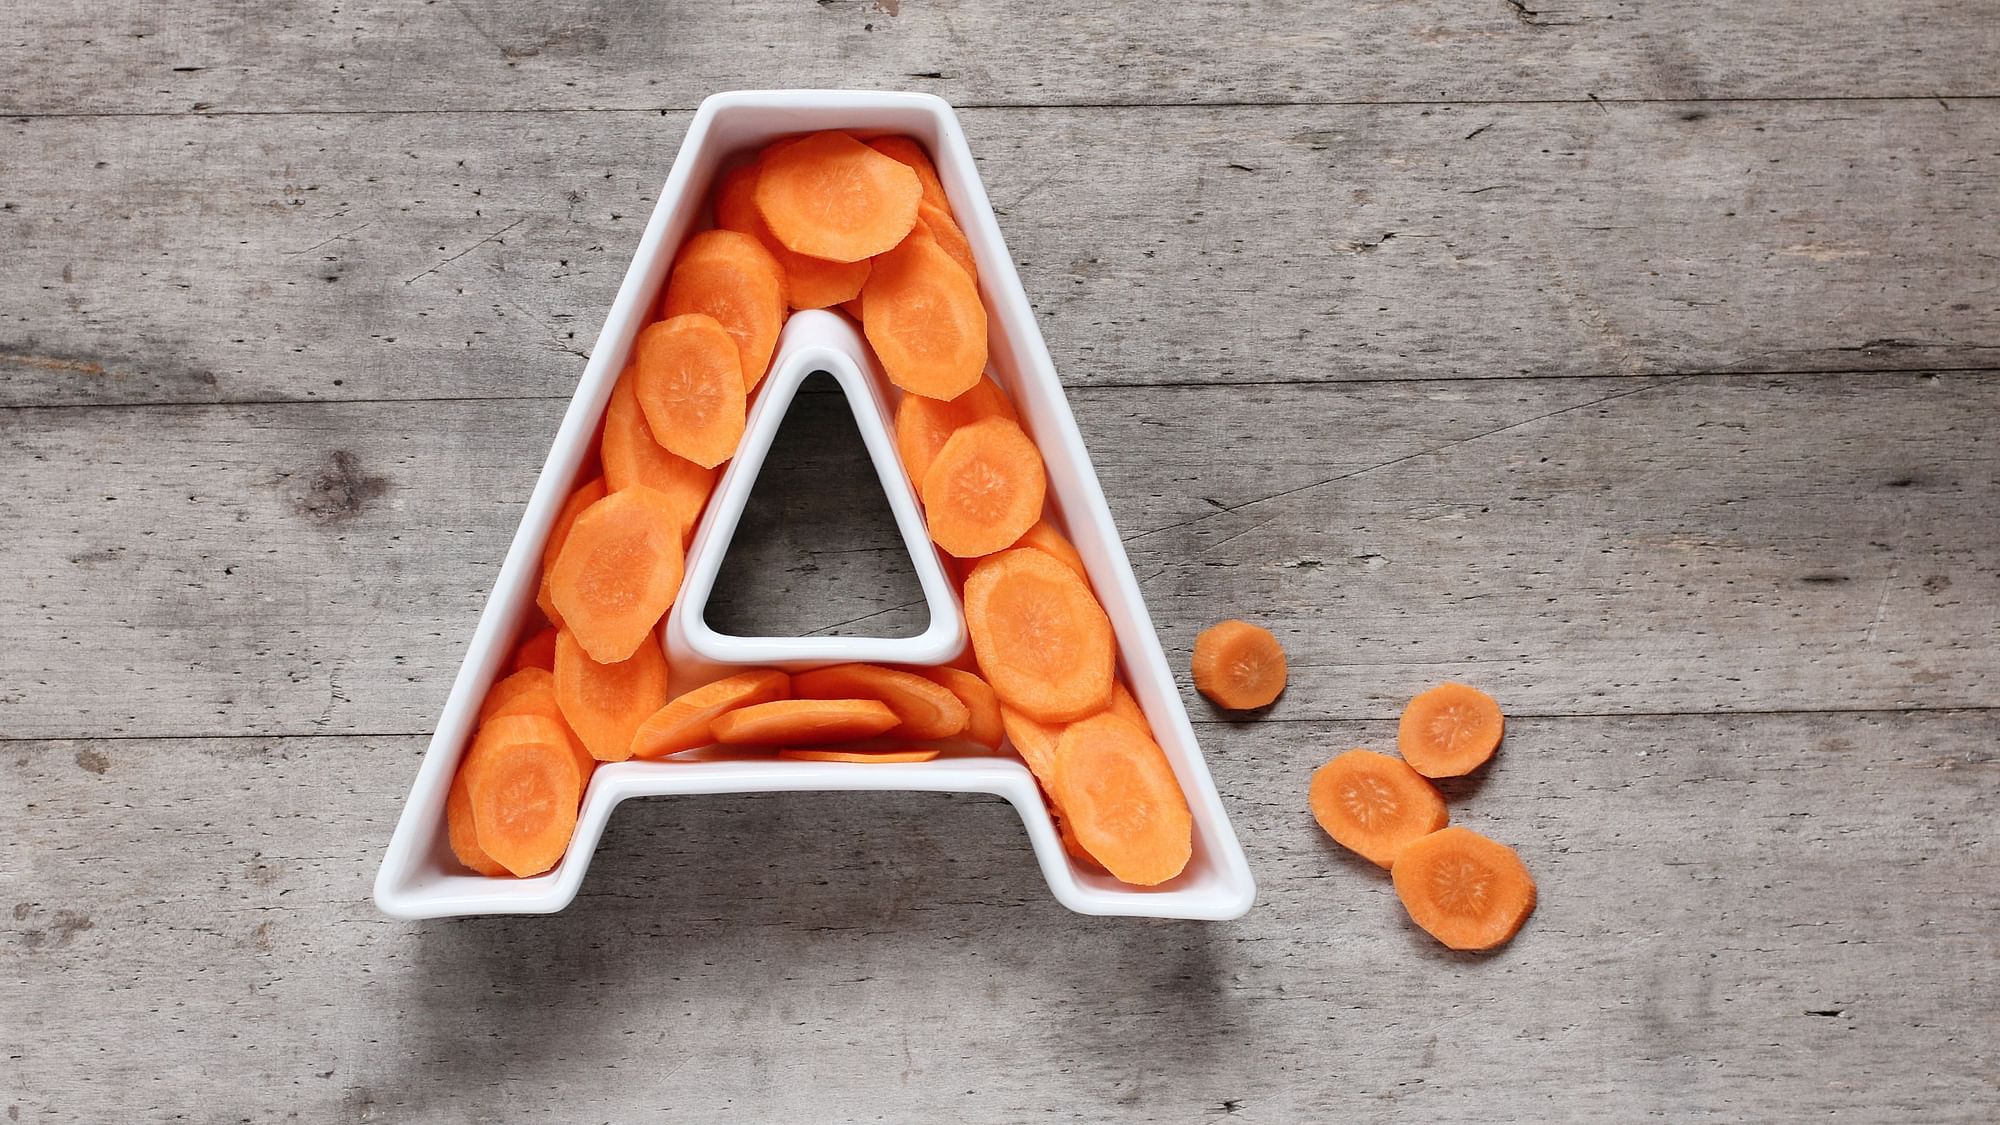 Research says that Vitamin A lowers the risk of skin cancer